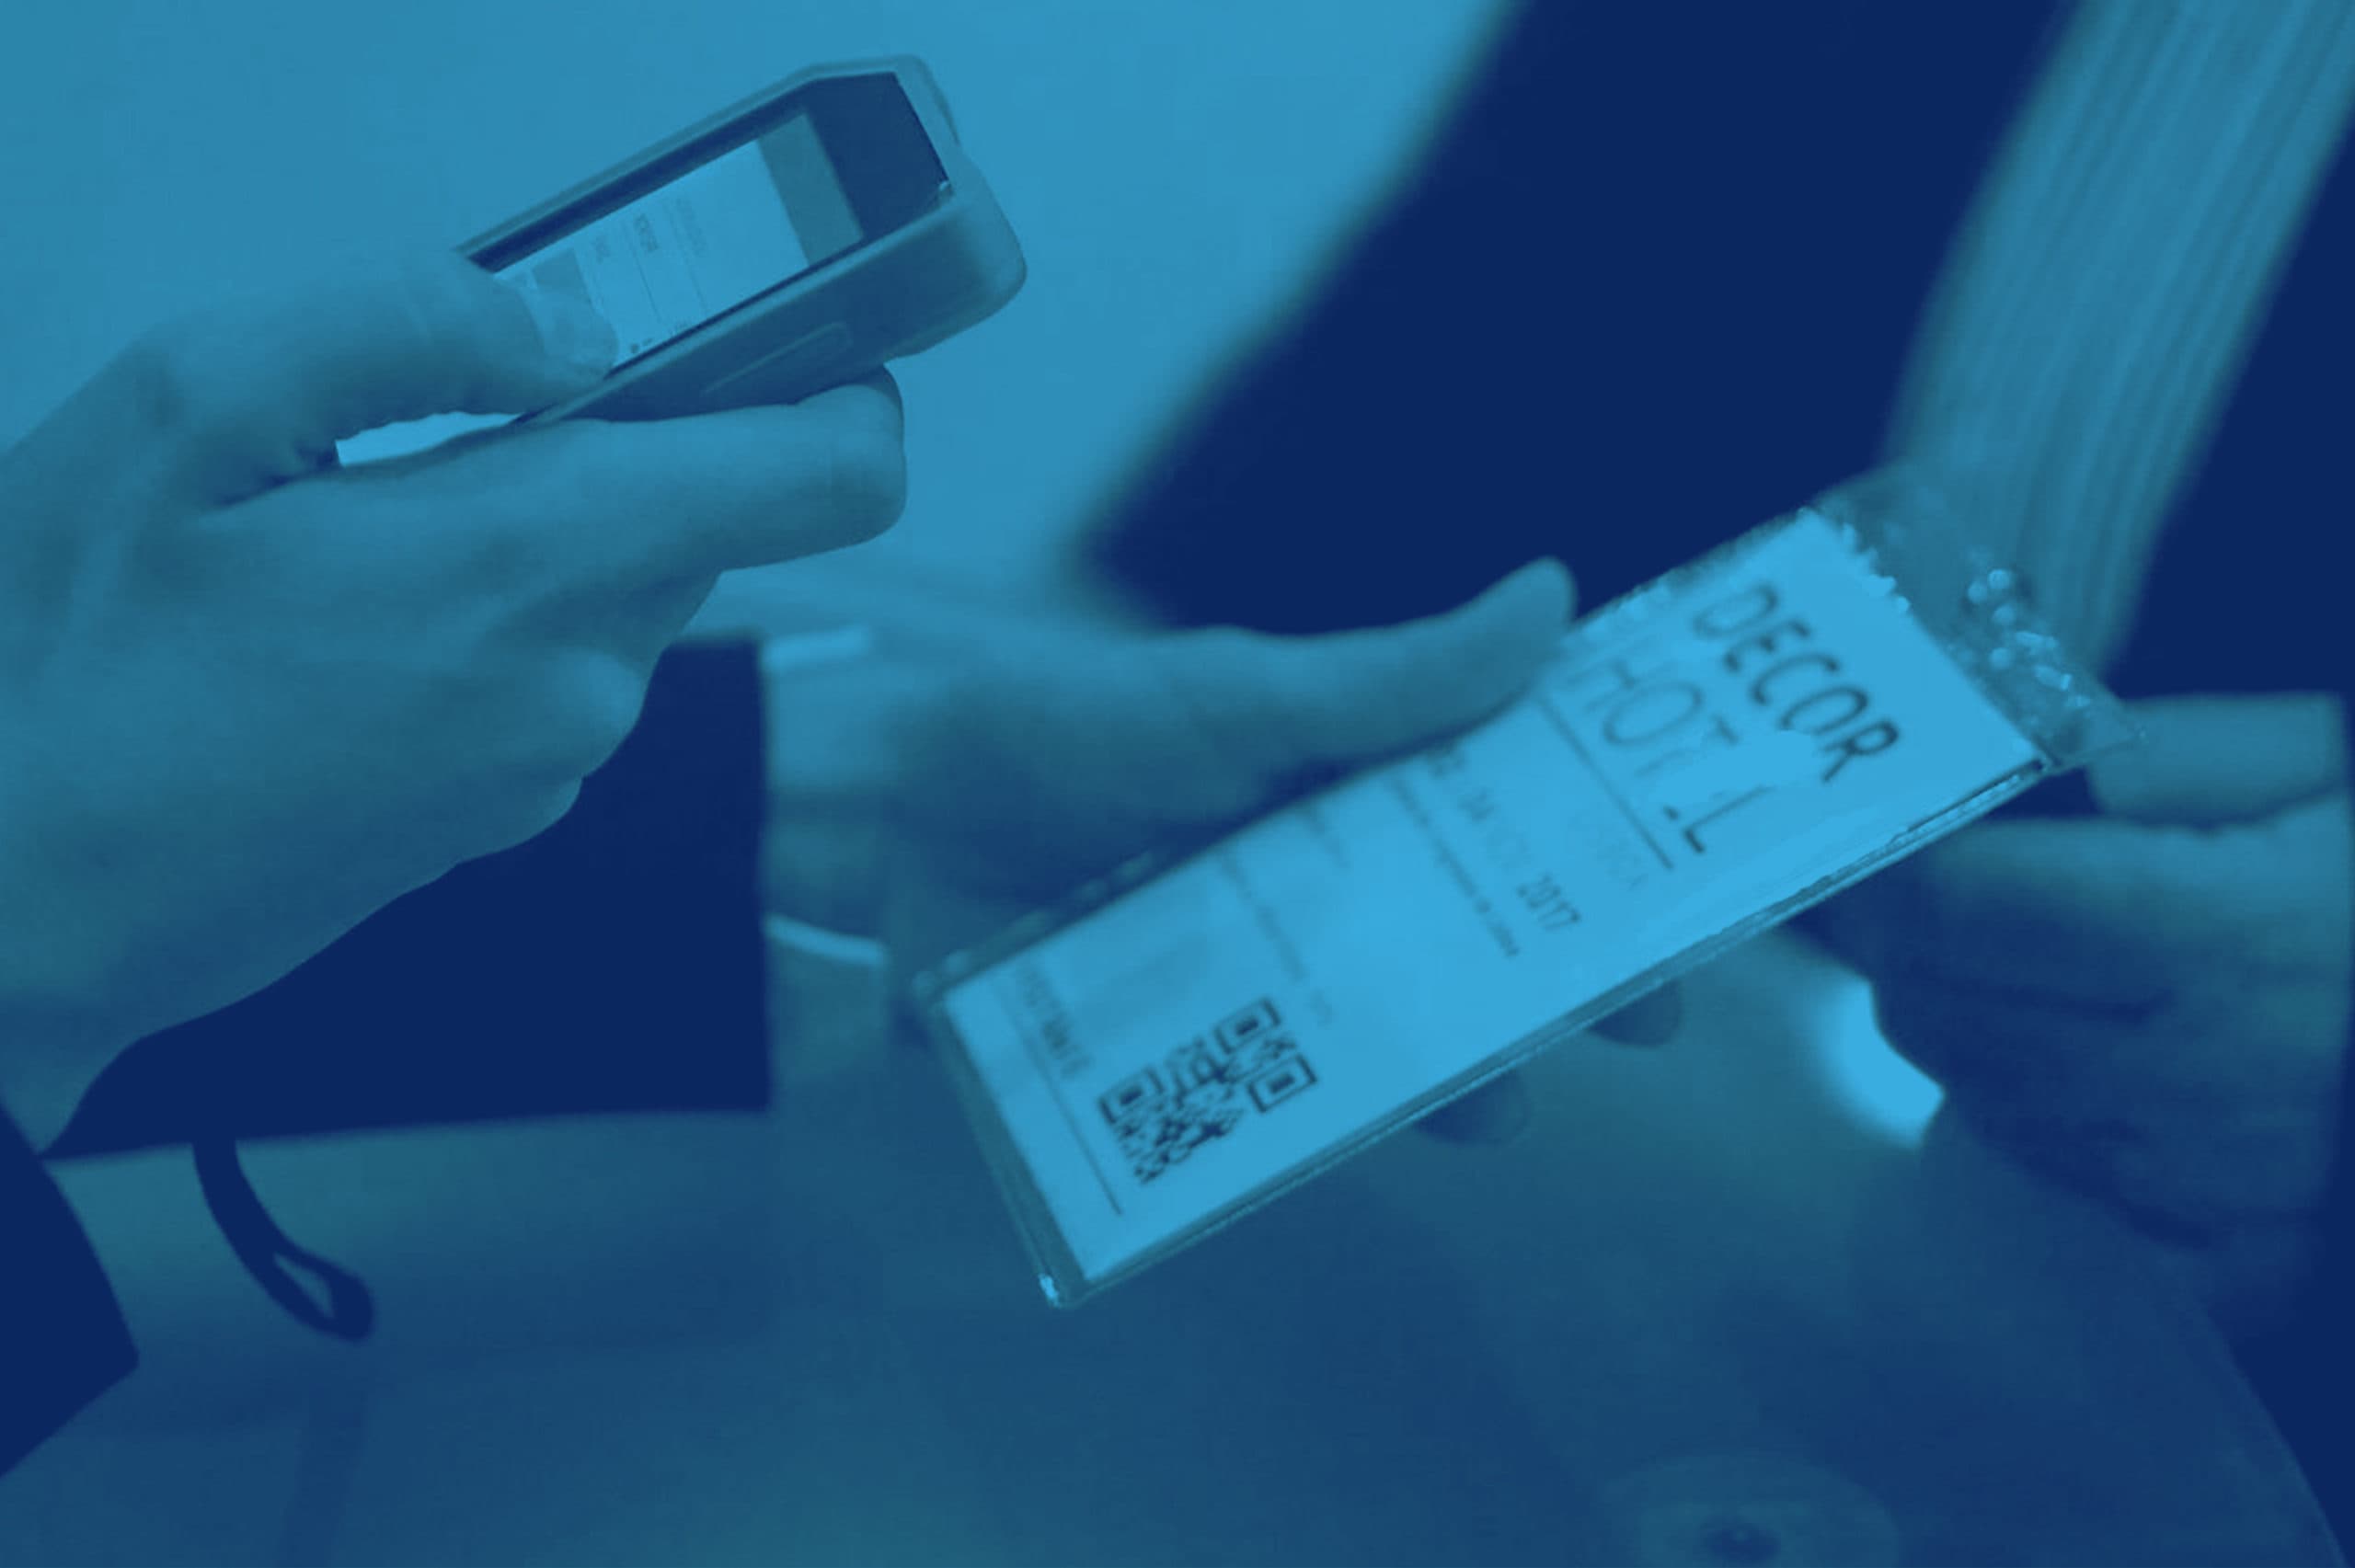 Sustainable events have contactless & paperless interactions